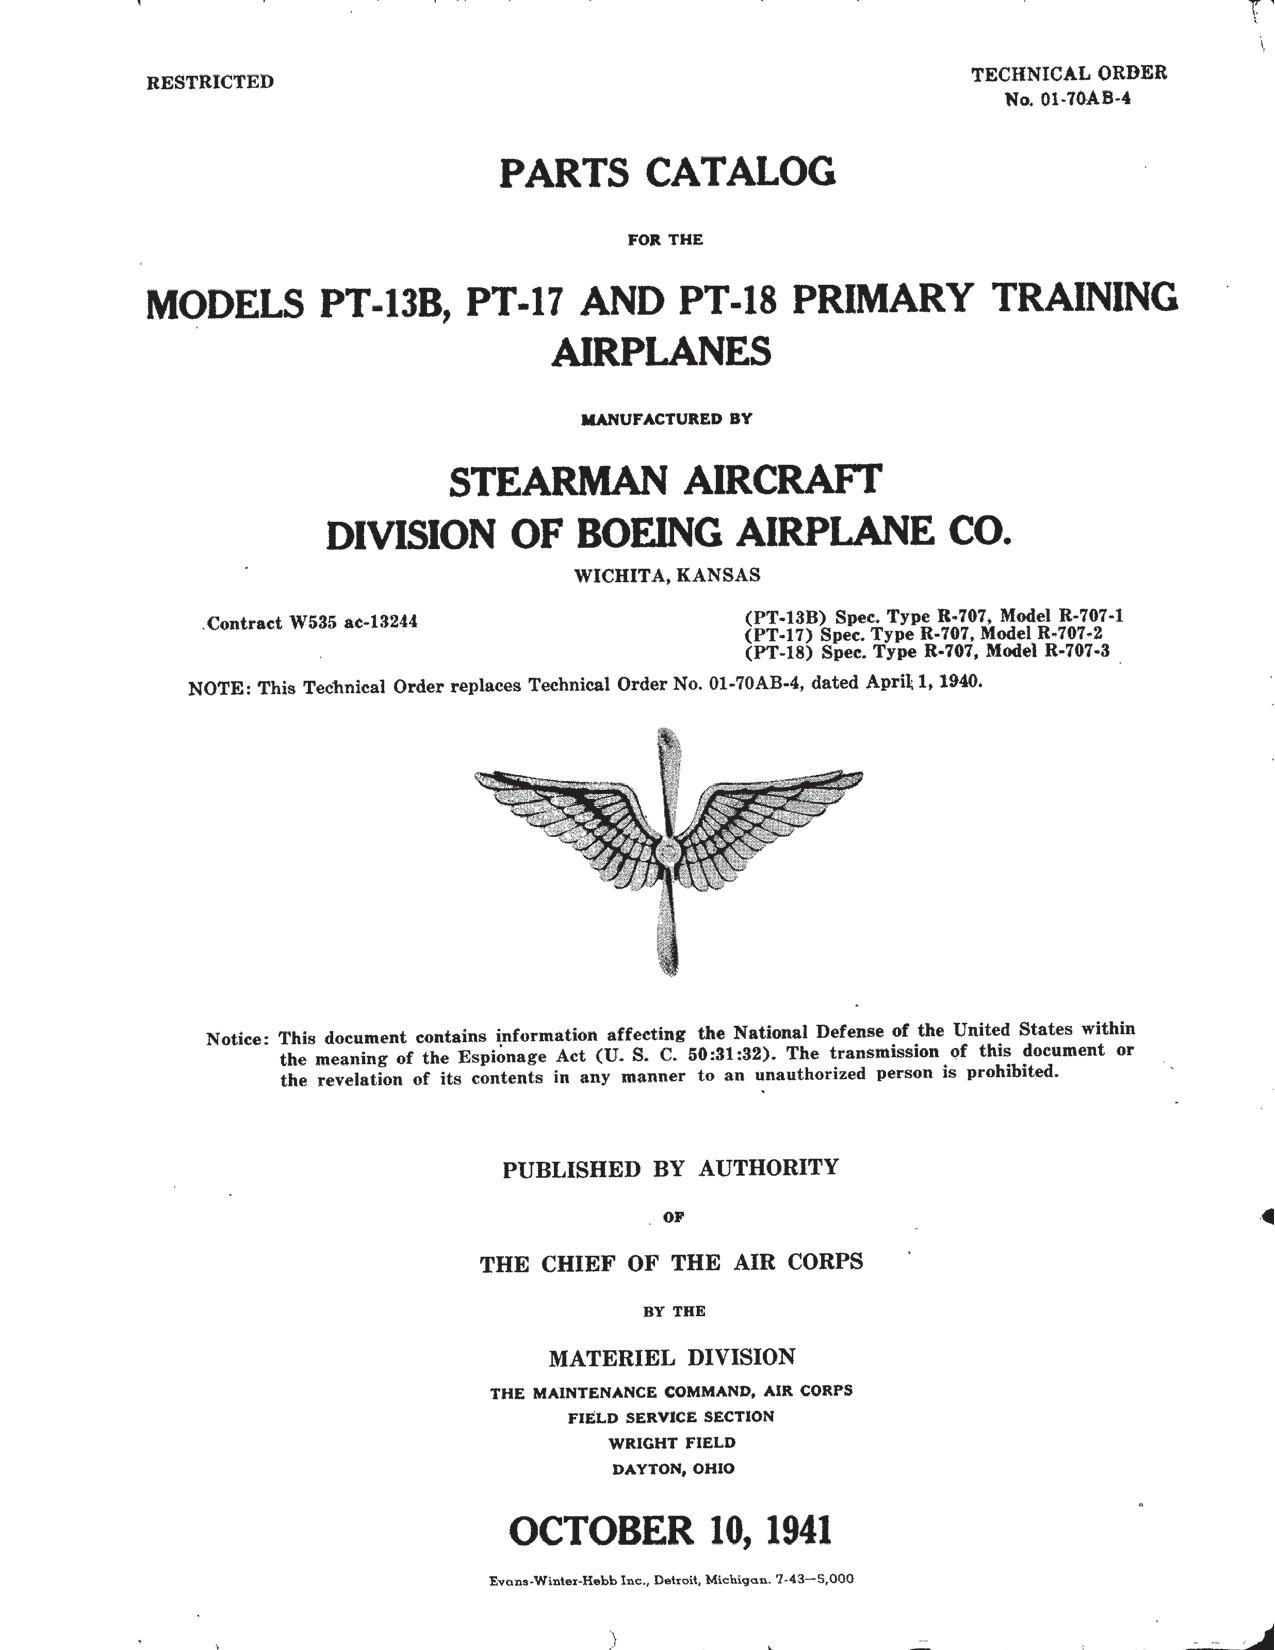 Sample page 1 from AirCorps Library document: Parts Catalog - PT-13B, PT-17, PT-18